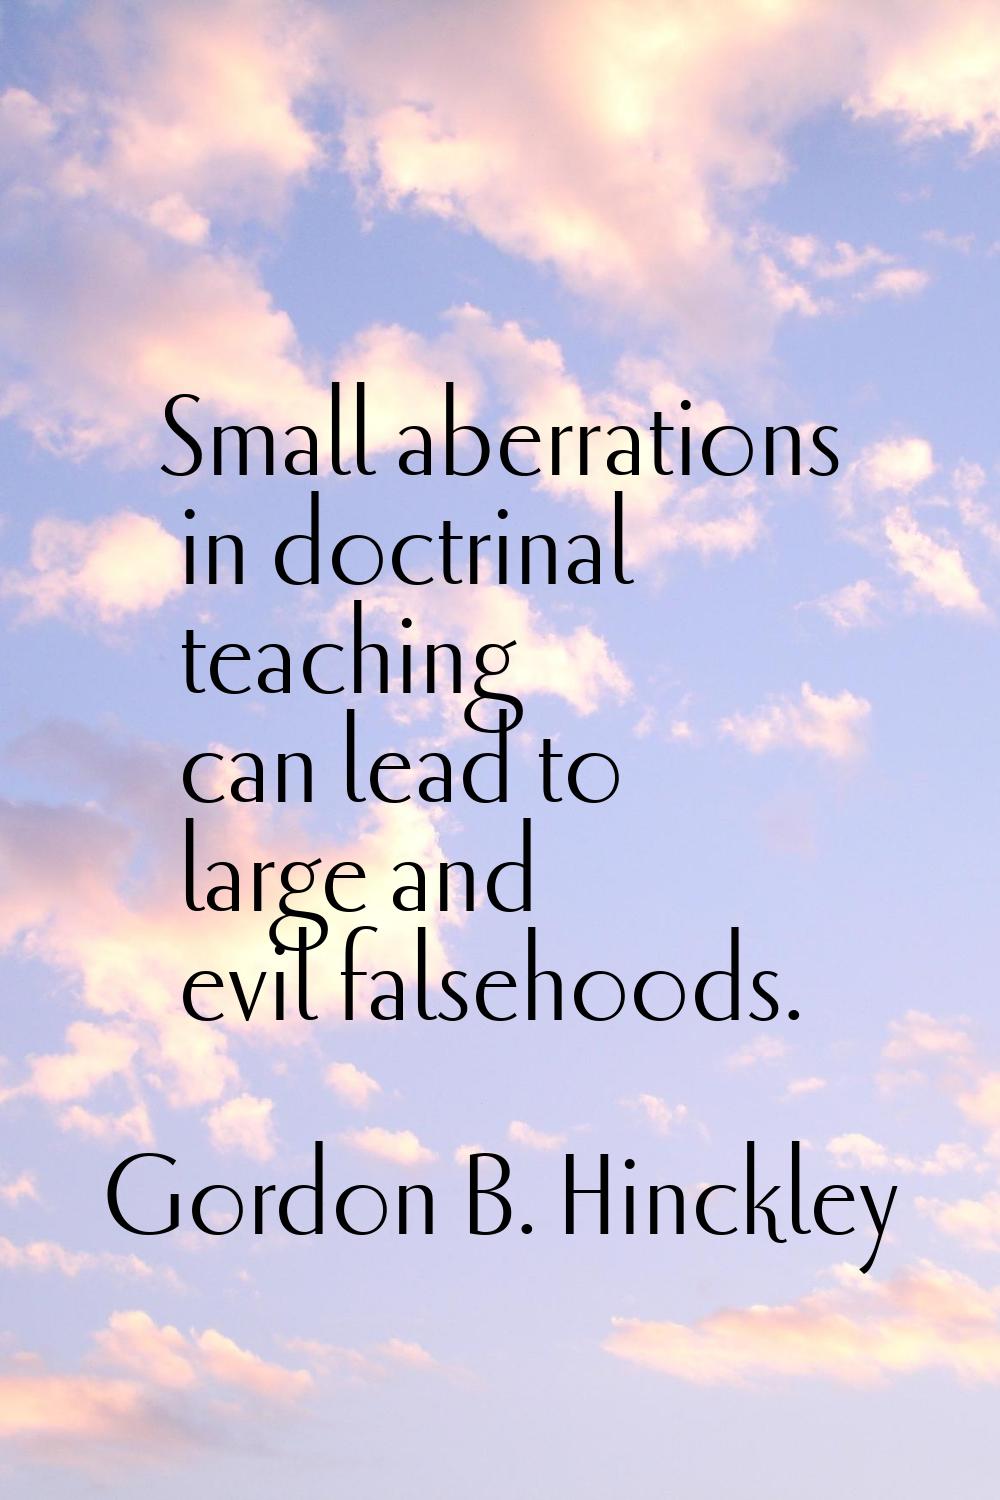 Small aberrations in doctrinal teaching can lead to large and evil falsehoods.